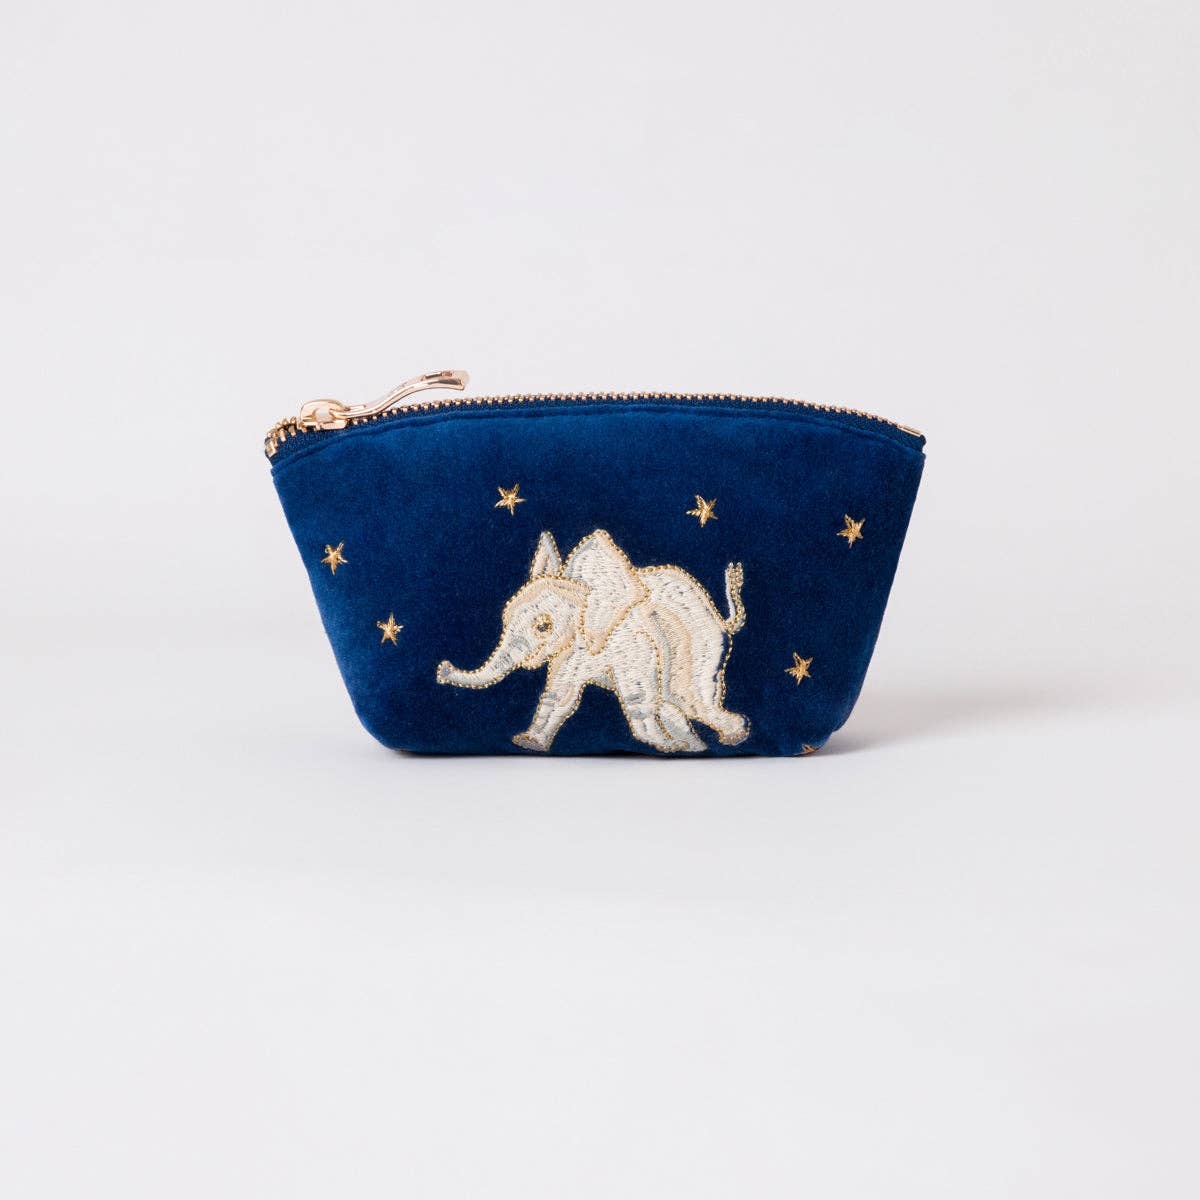 Orphaned Elephants Conservation Collection Coin Purse: Navy / Velvet